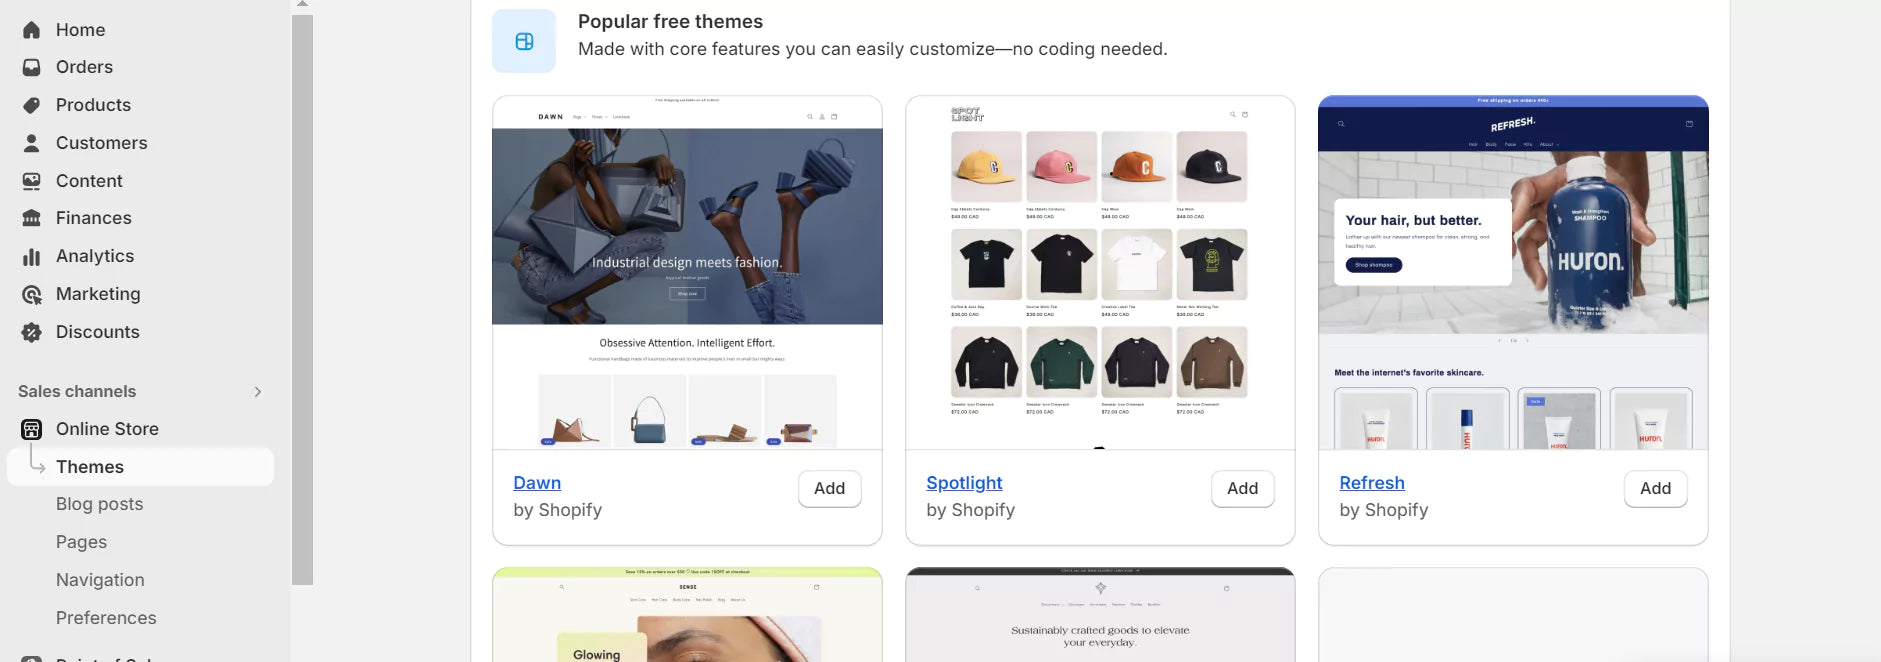 Popular free Shopify blog themes presented in the admin dashboard